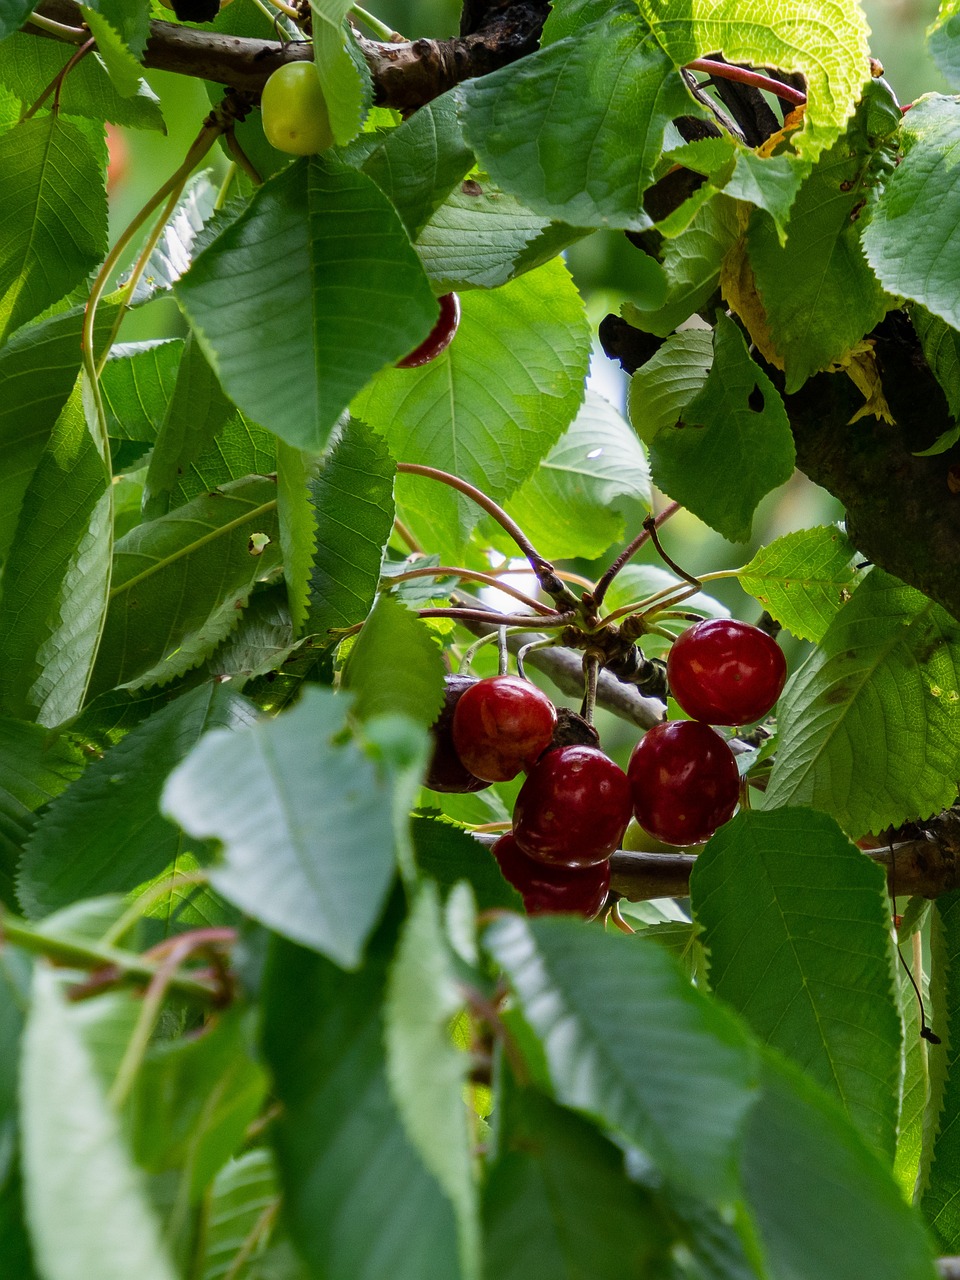 a close up of a bunch of cherries on a tree, a portrait, bauhaus, photo 85mm, village, sheltering under a leaf, detailed zoom photo